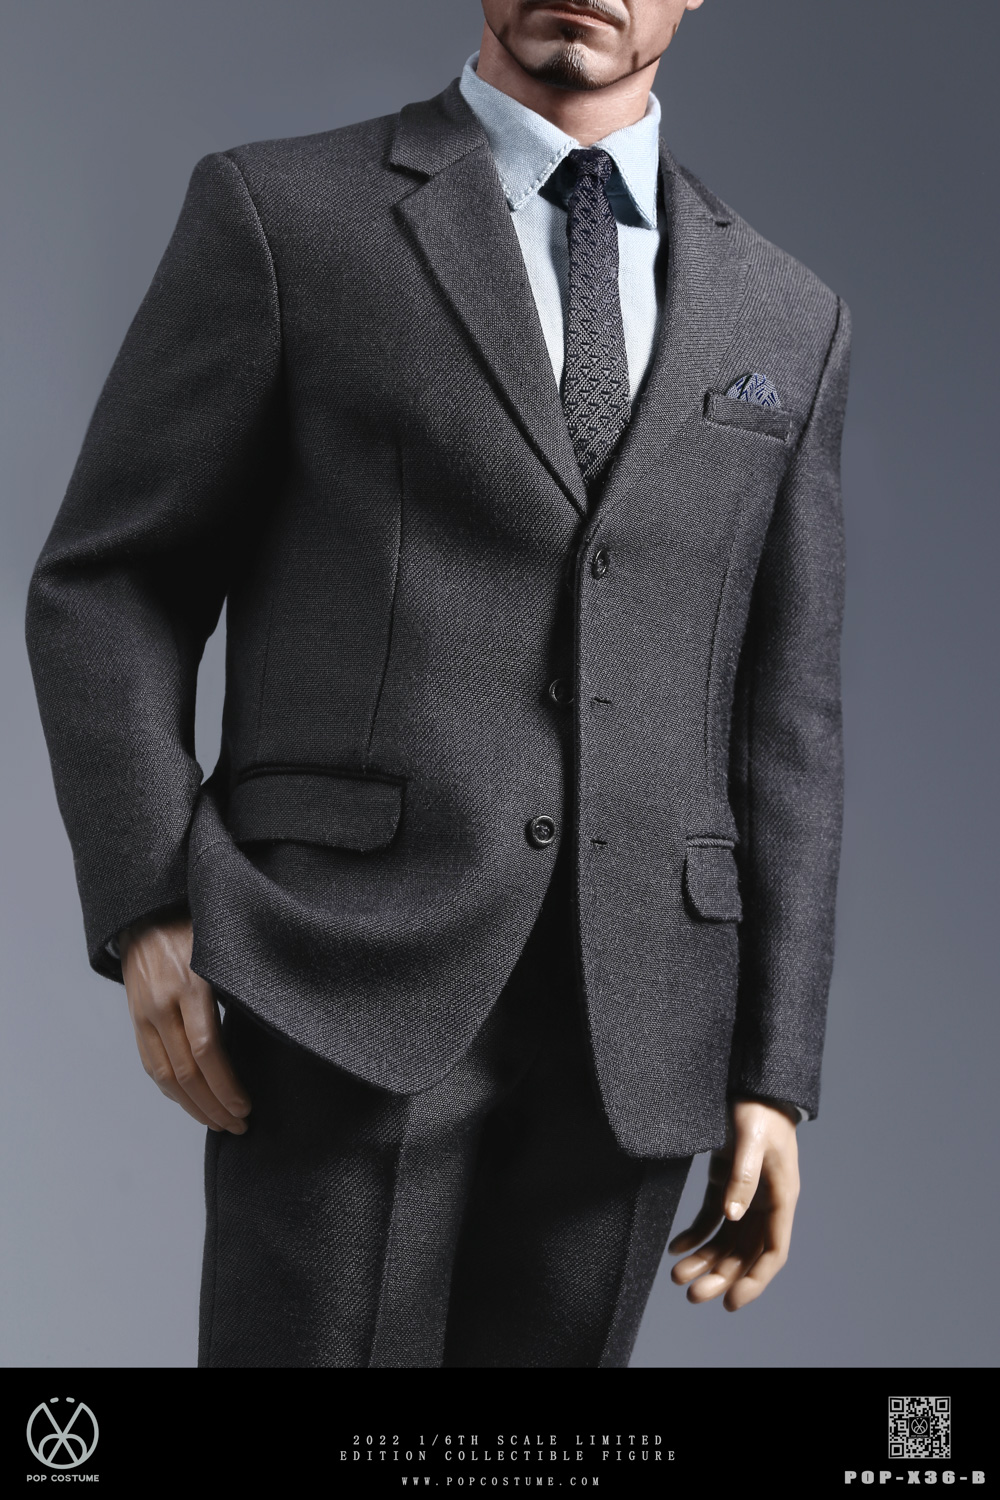 PopCostume - NEW PRODUCT: Pop Costume: 1/6 2022 Fall New Men's Haute Couture Suit Set Box [8 Styles Optional] & Display Stand 17234712